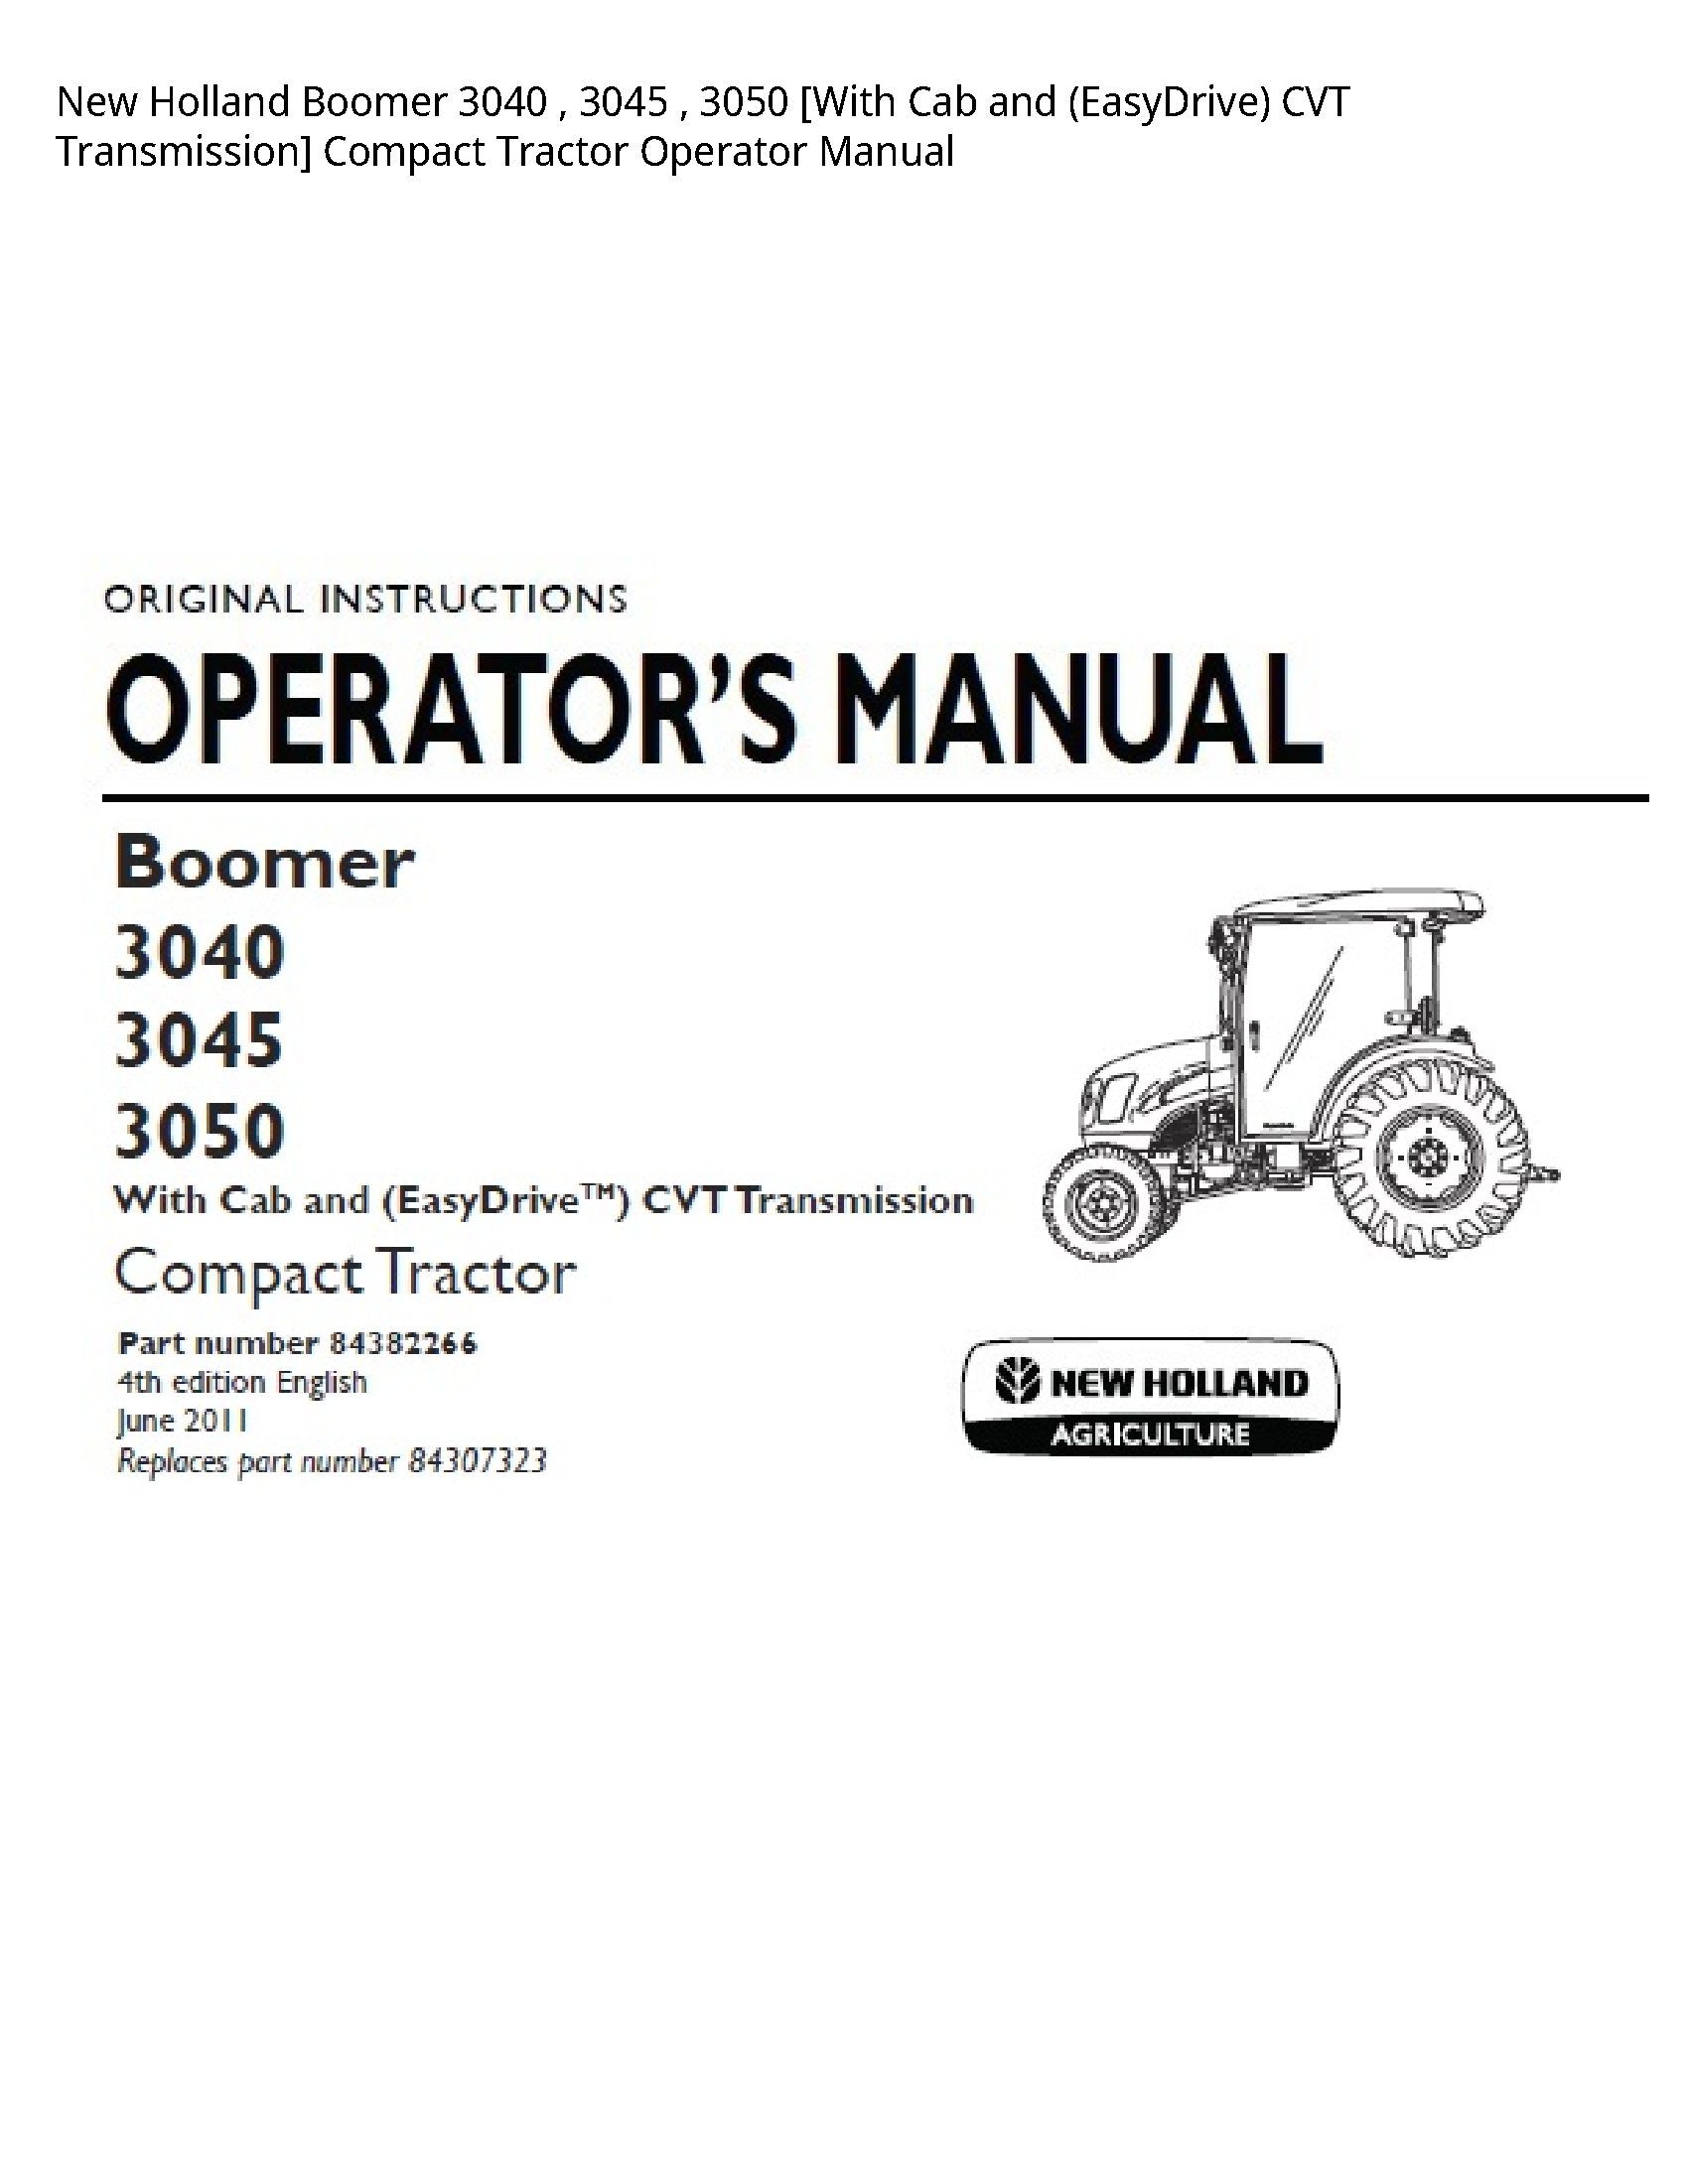 New Holland 3040 Boomer [With Cab  (EasyDrive) CVT Transmission] Compact Tractor Operator manual